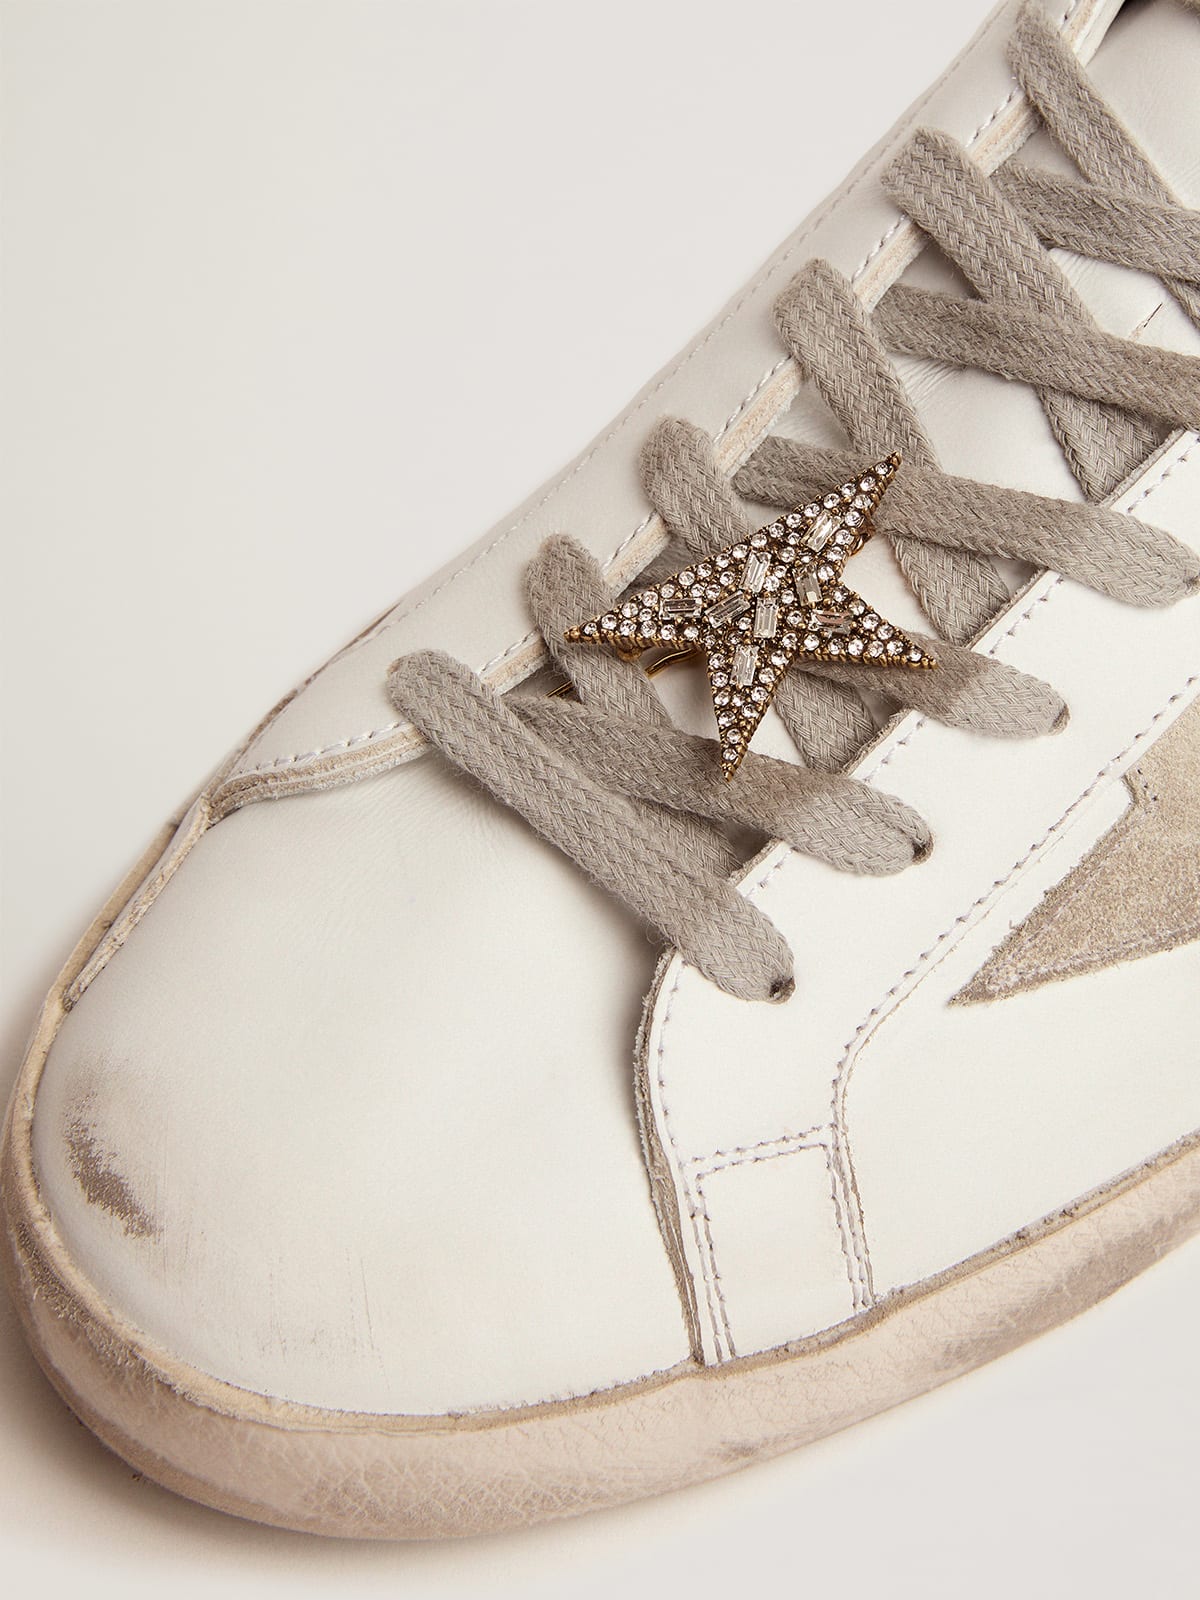 Golden Goose - Star-shaped lace lock in old gold color with decorative crystals in 